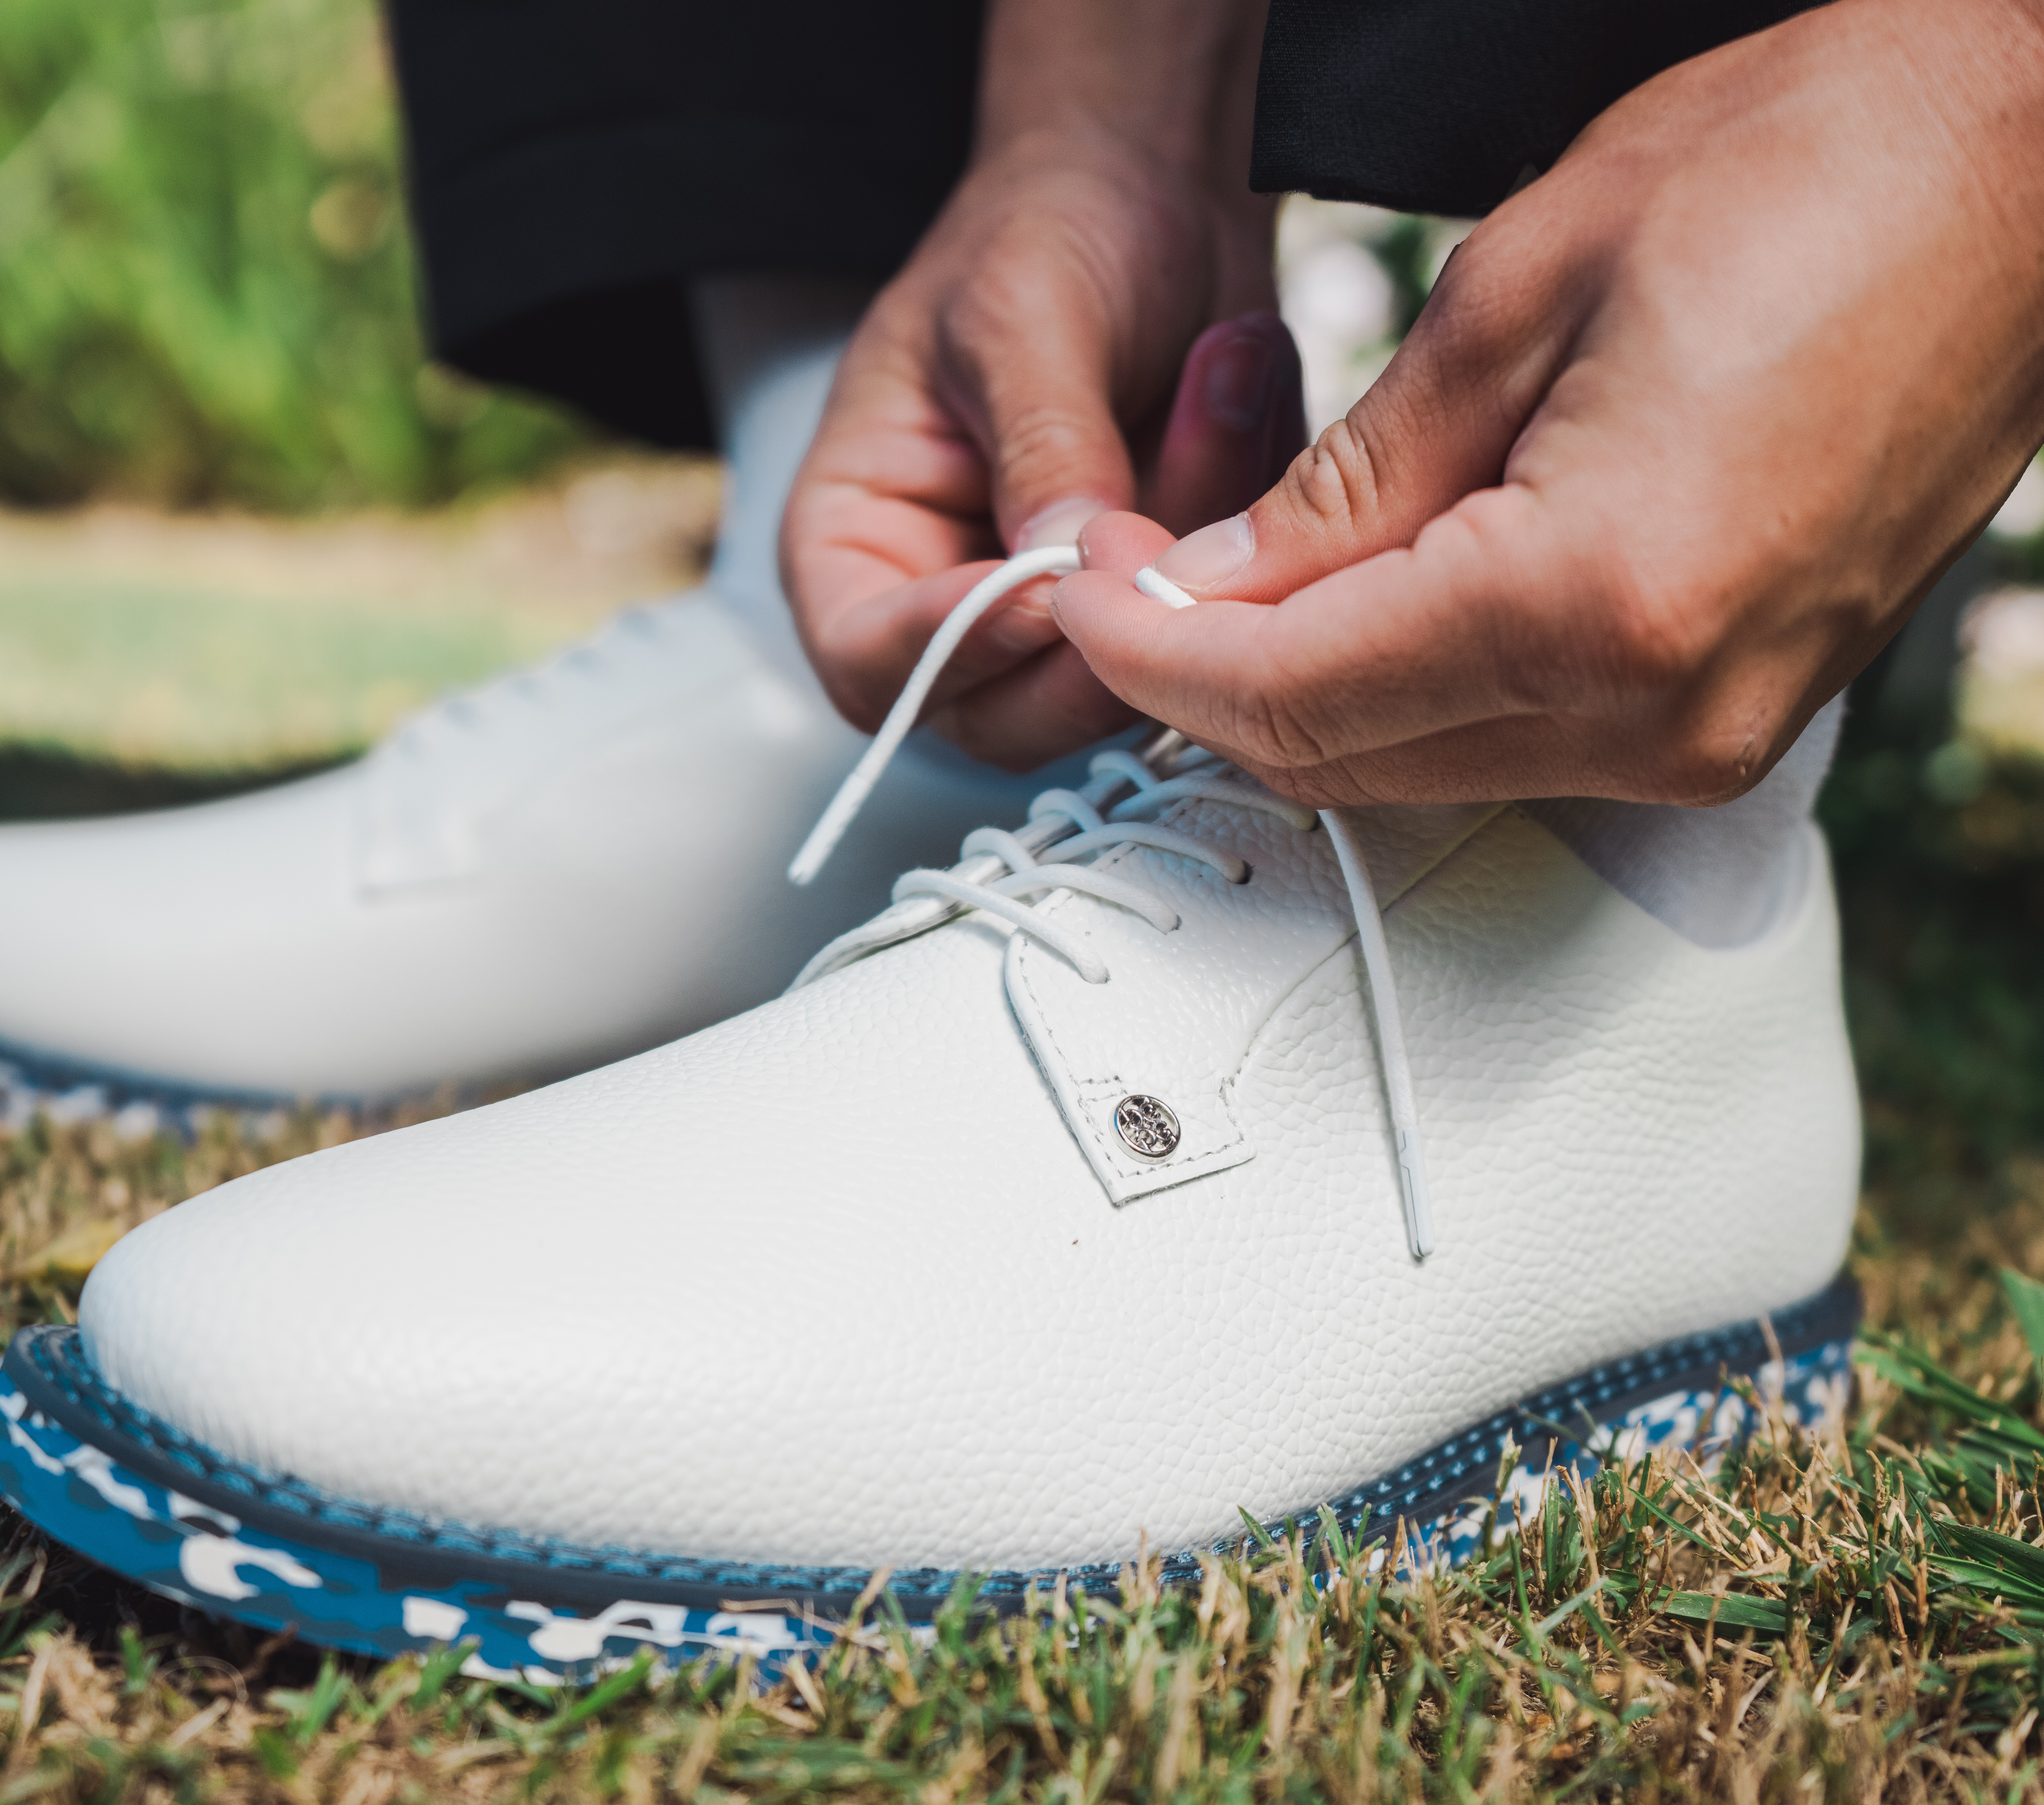 TaylorMade, G/Fore shoe collab is awesome